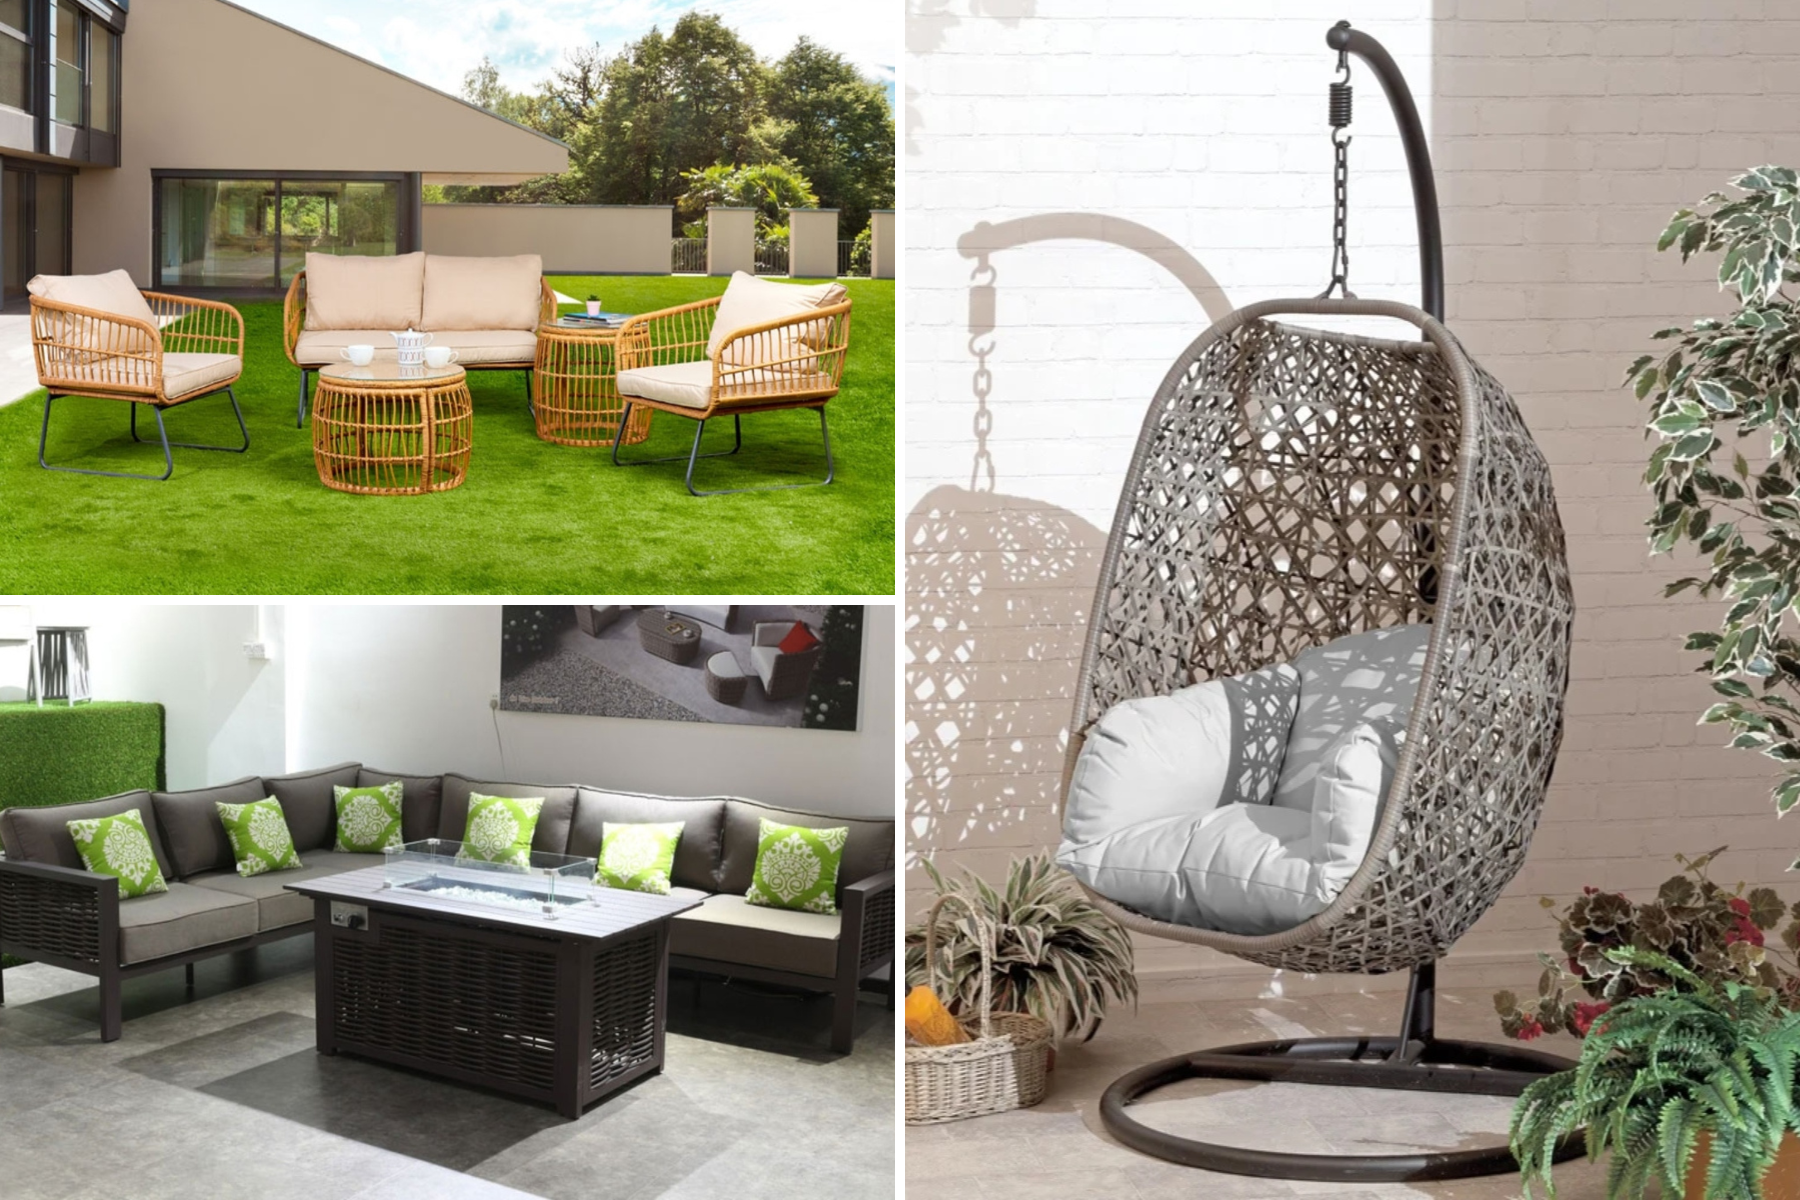 All Round Fun have up to 50 per cent off garden furniture